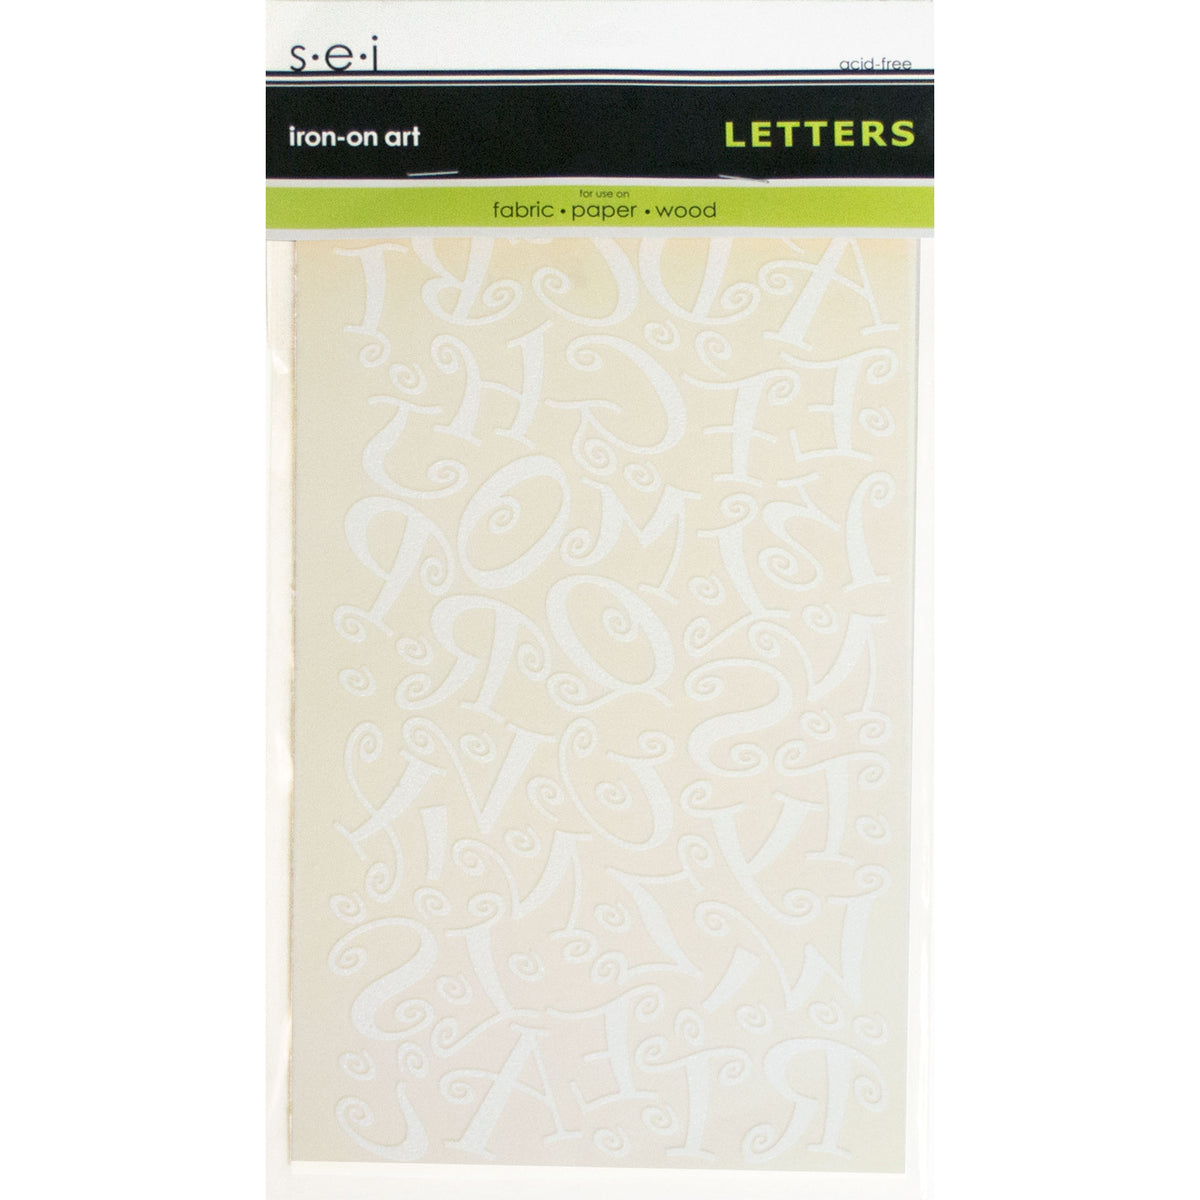 SALE-SEI Iron on Art Flocked Transfers-alphabet Letters Use on Fabric-paper-wood-bible  Journaling-planners-quiet Books-christmas Stocking 